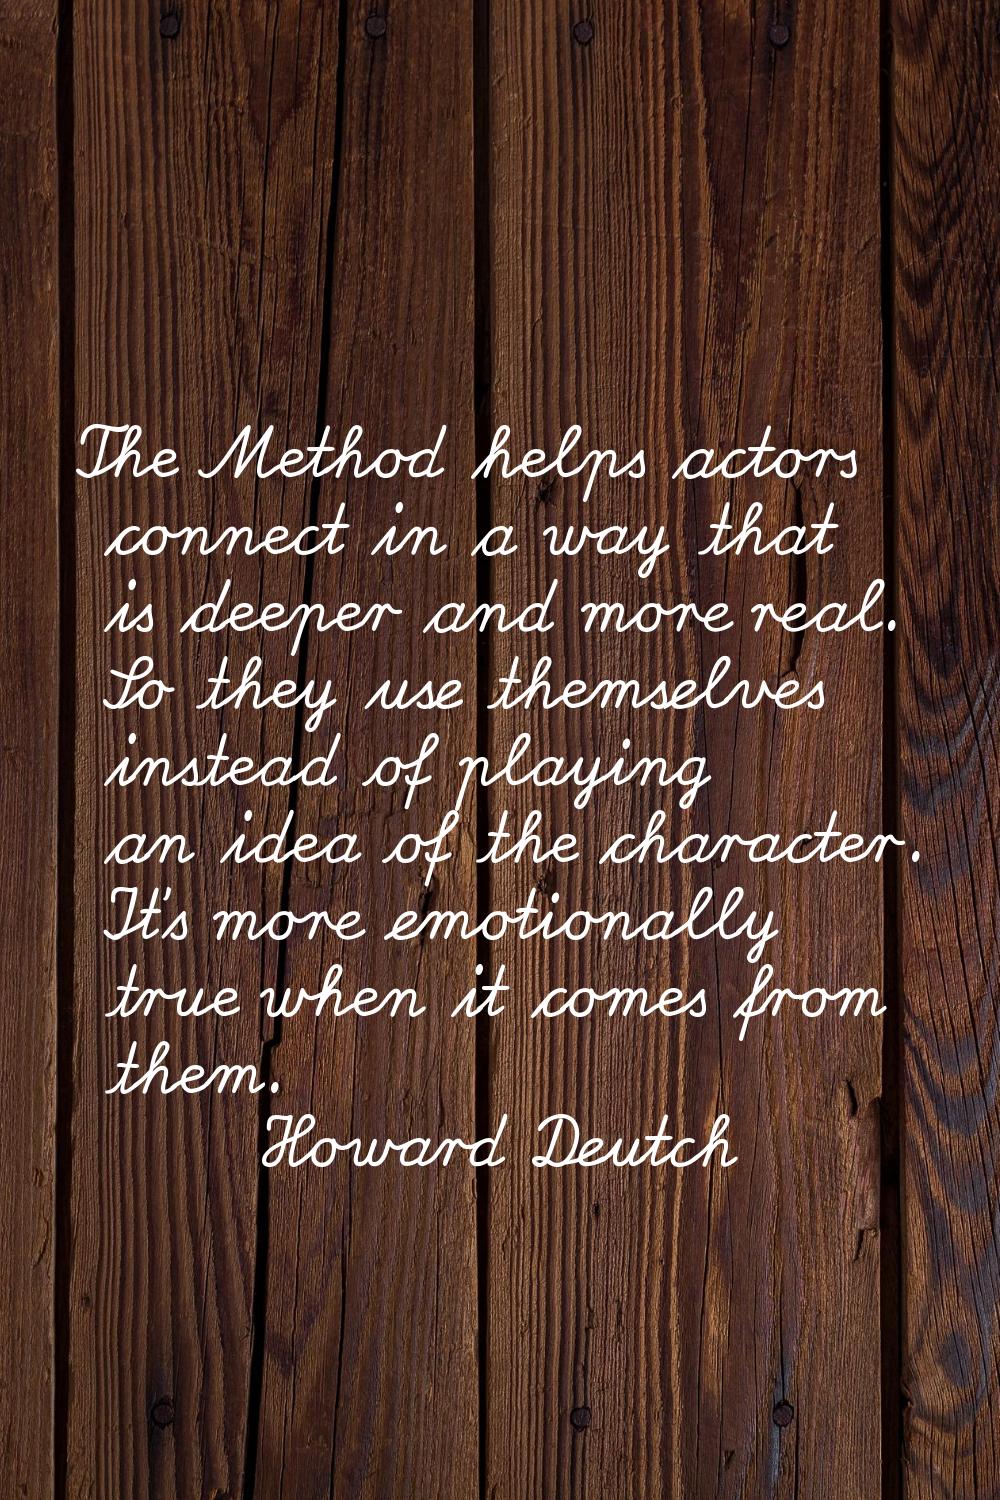 The Method helps actors connect in a way that is deeper and more real. So they use themselves inste